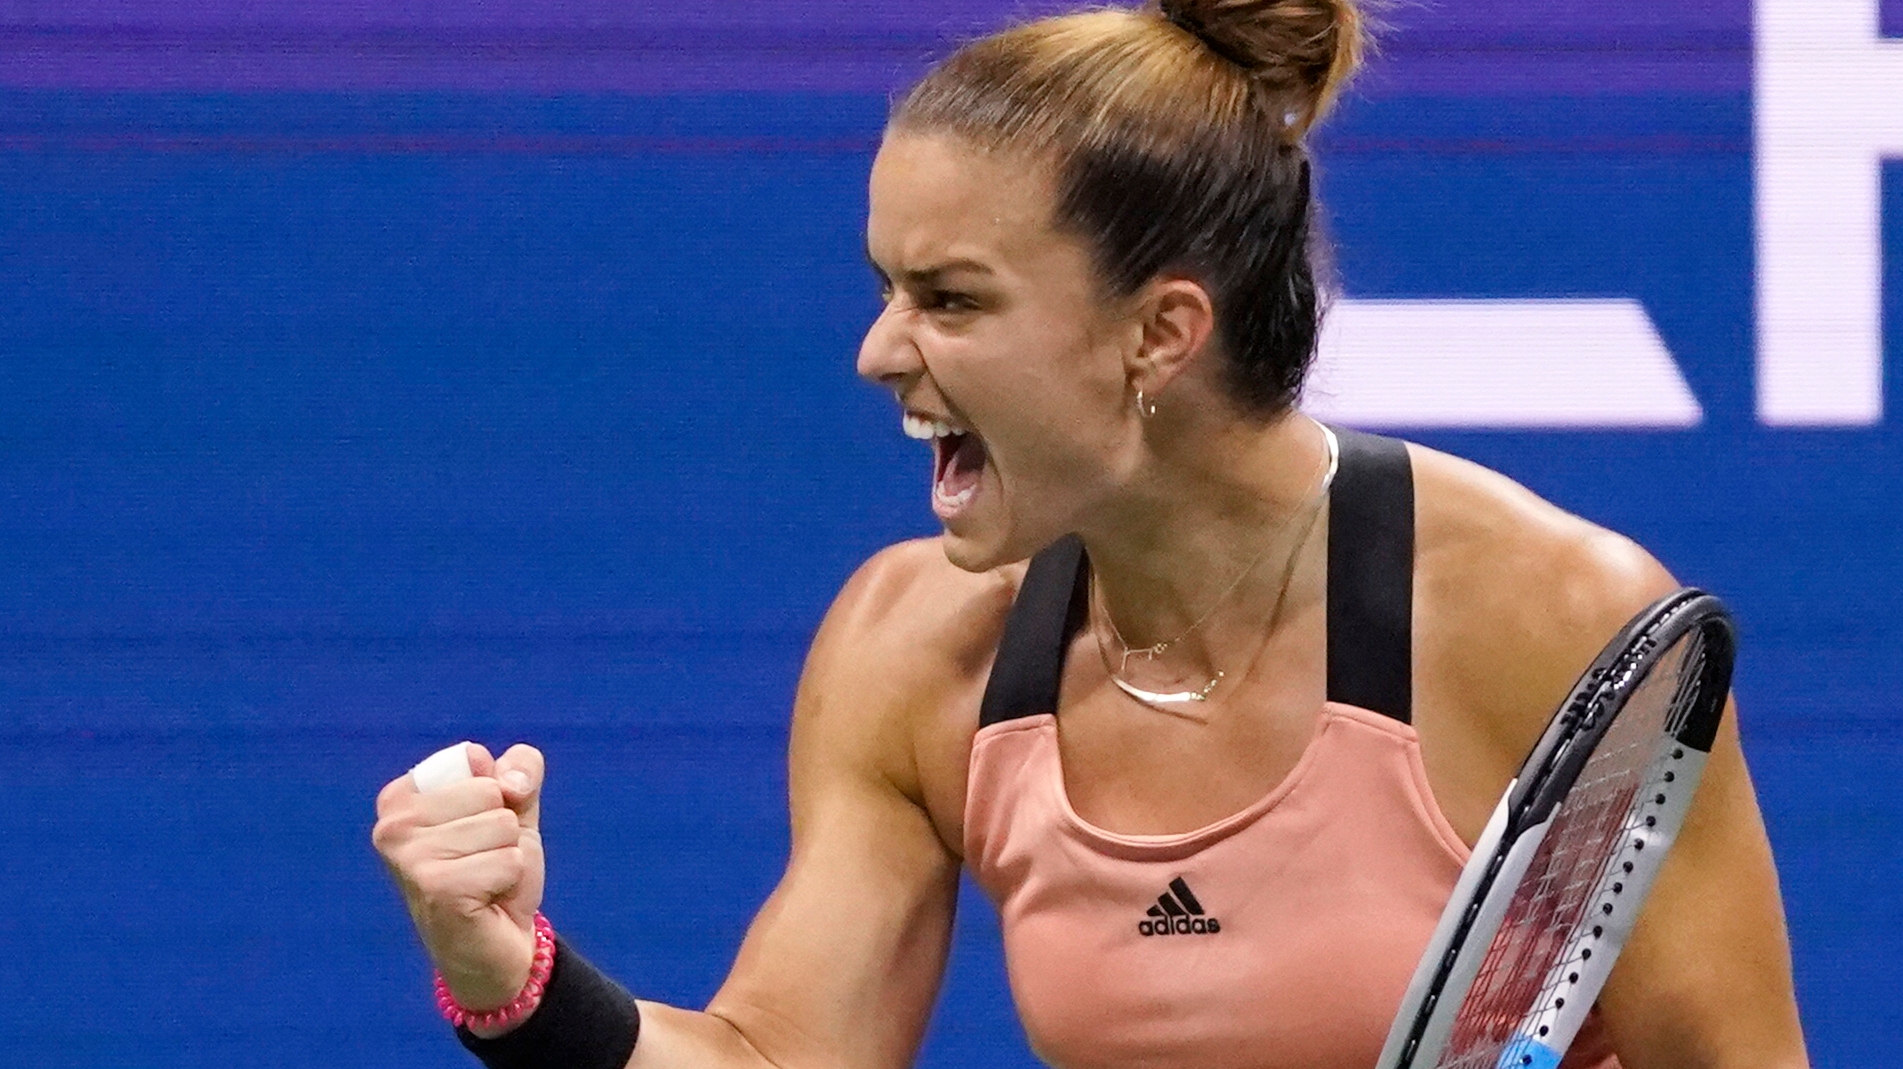 Maria Sakkari powers through to beat Bianca Andreescu in epic US Open match - Stream the Video